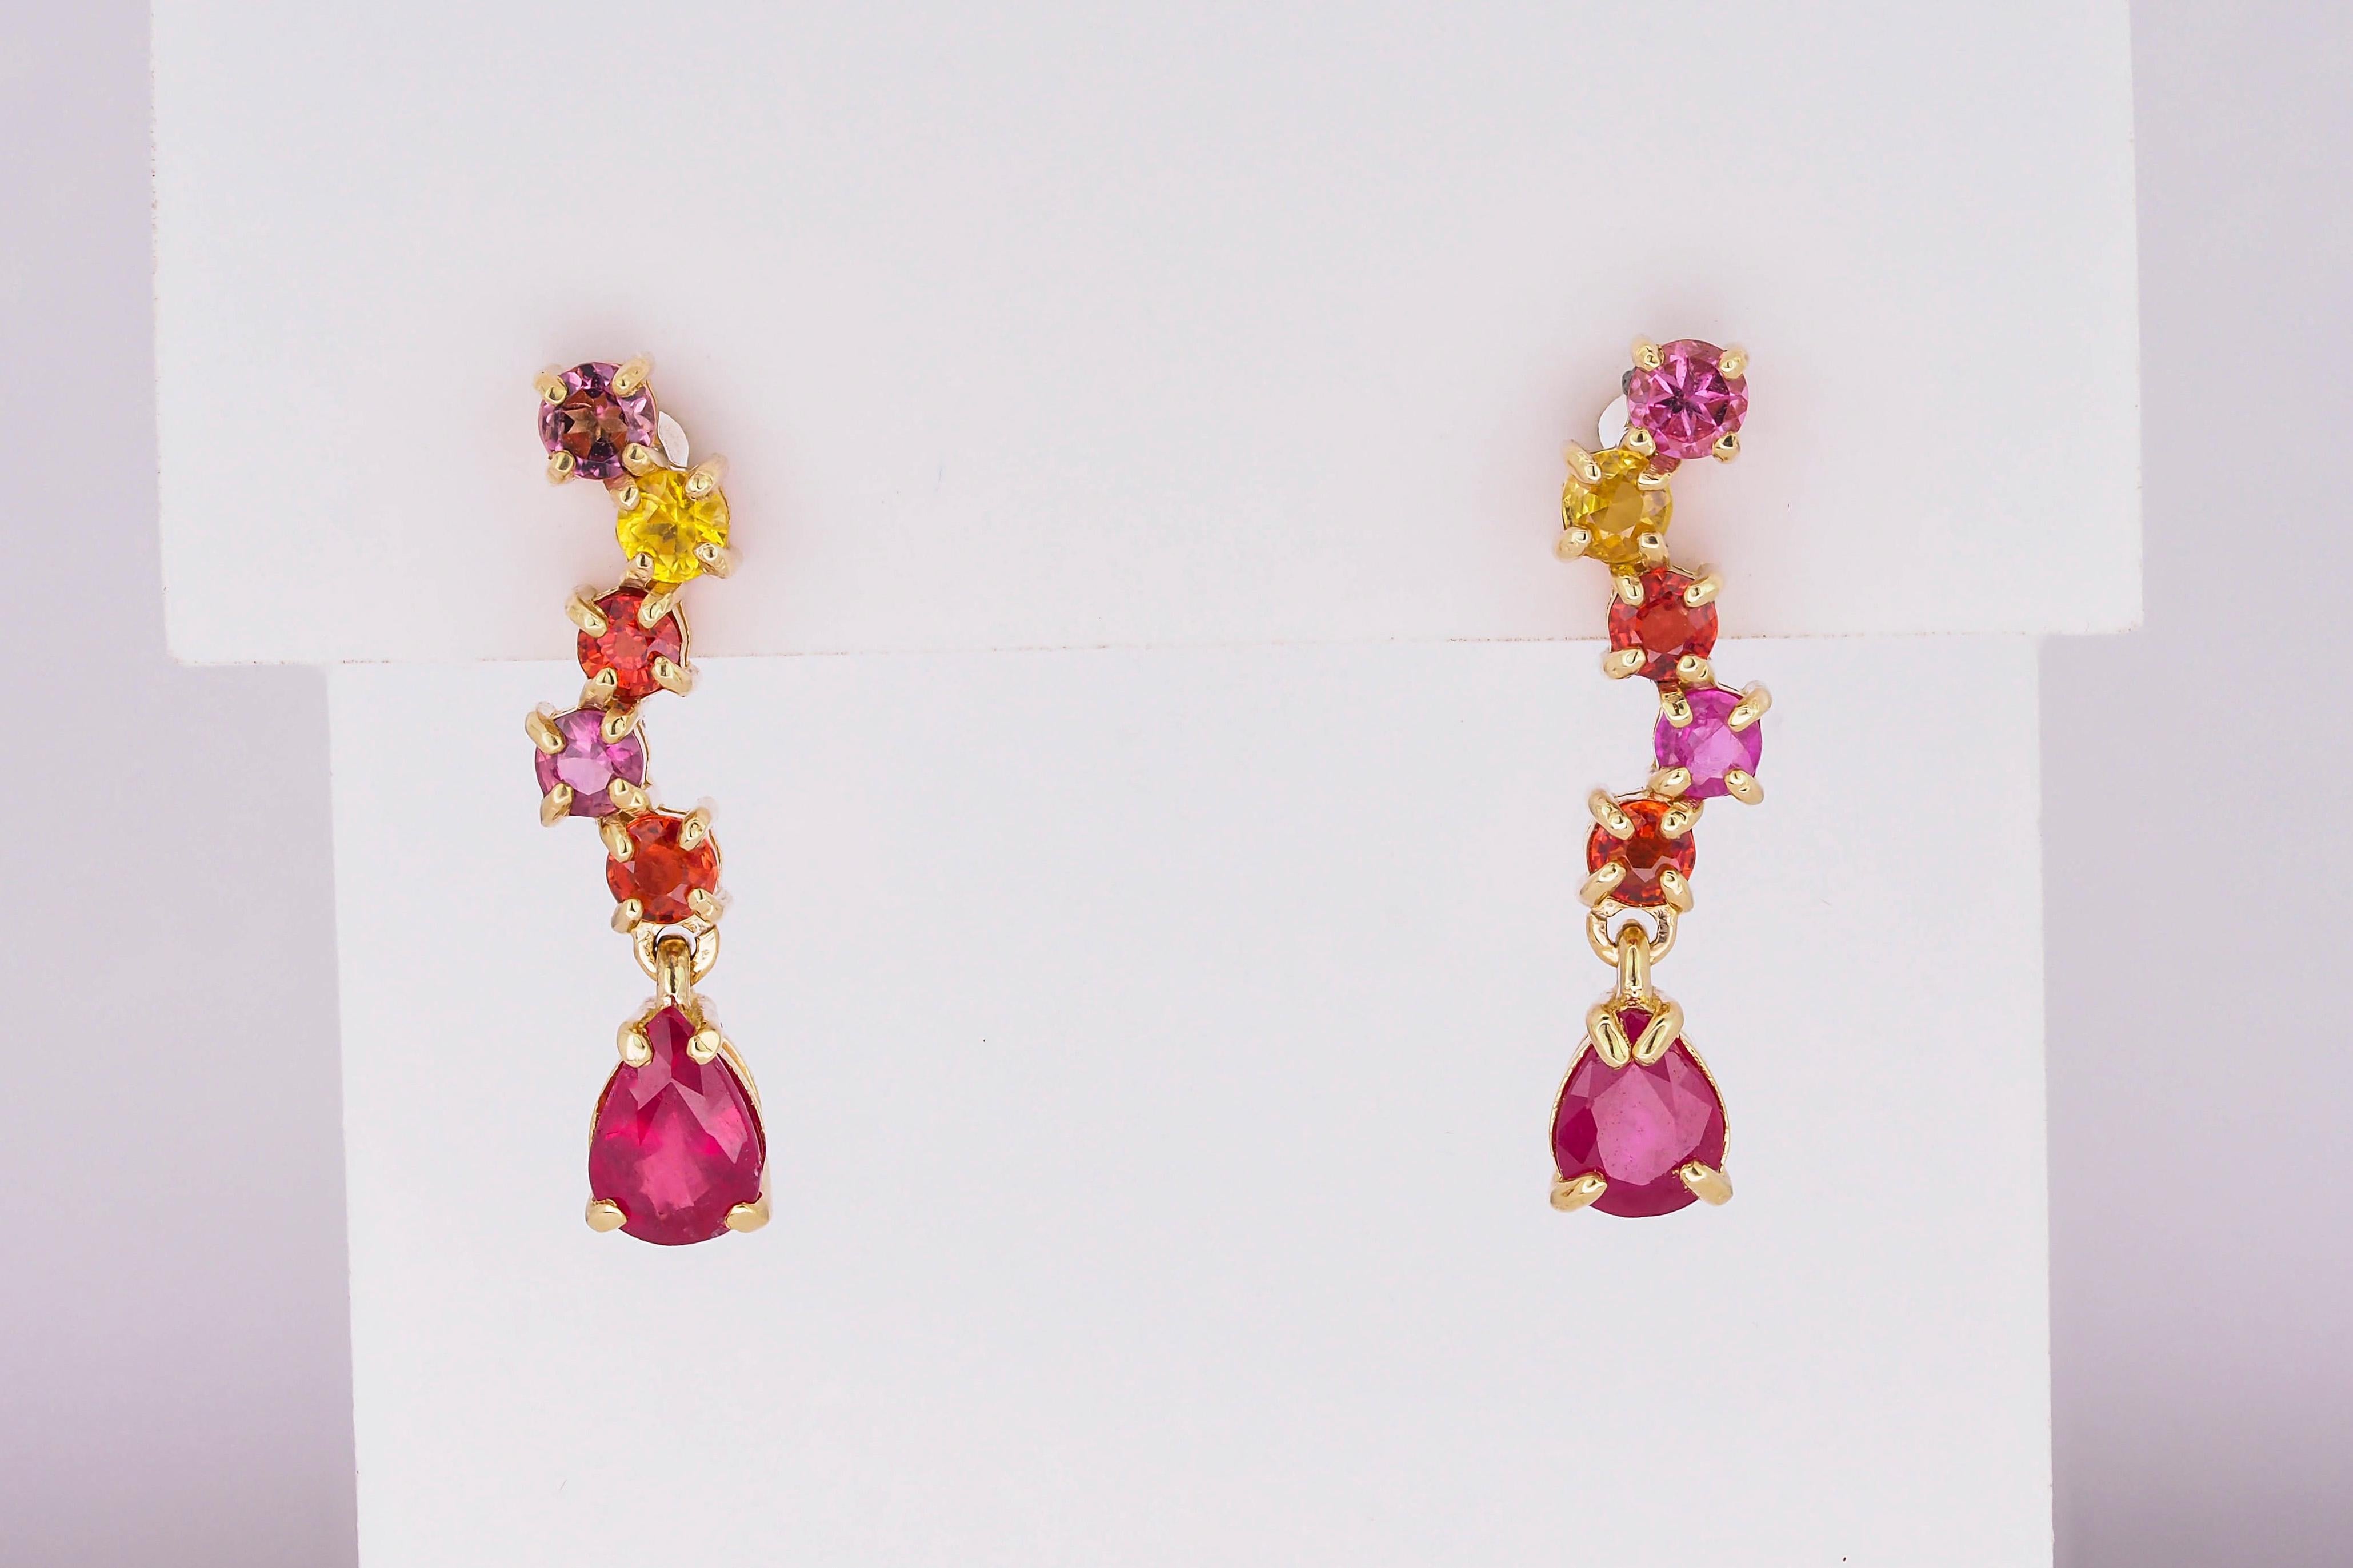 14kt solid gold earrings studs with multicolor natural sapphires and rubies. September birthstone. July birthstone.

Metal: 14k gold (can be done yellow, white or pink)
Total weight: 2.20 g.
Size: 20 x 5 mm.

Central stones: Natural rubies - 2